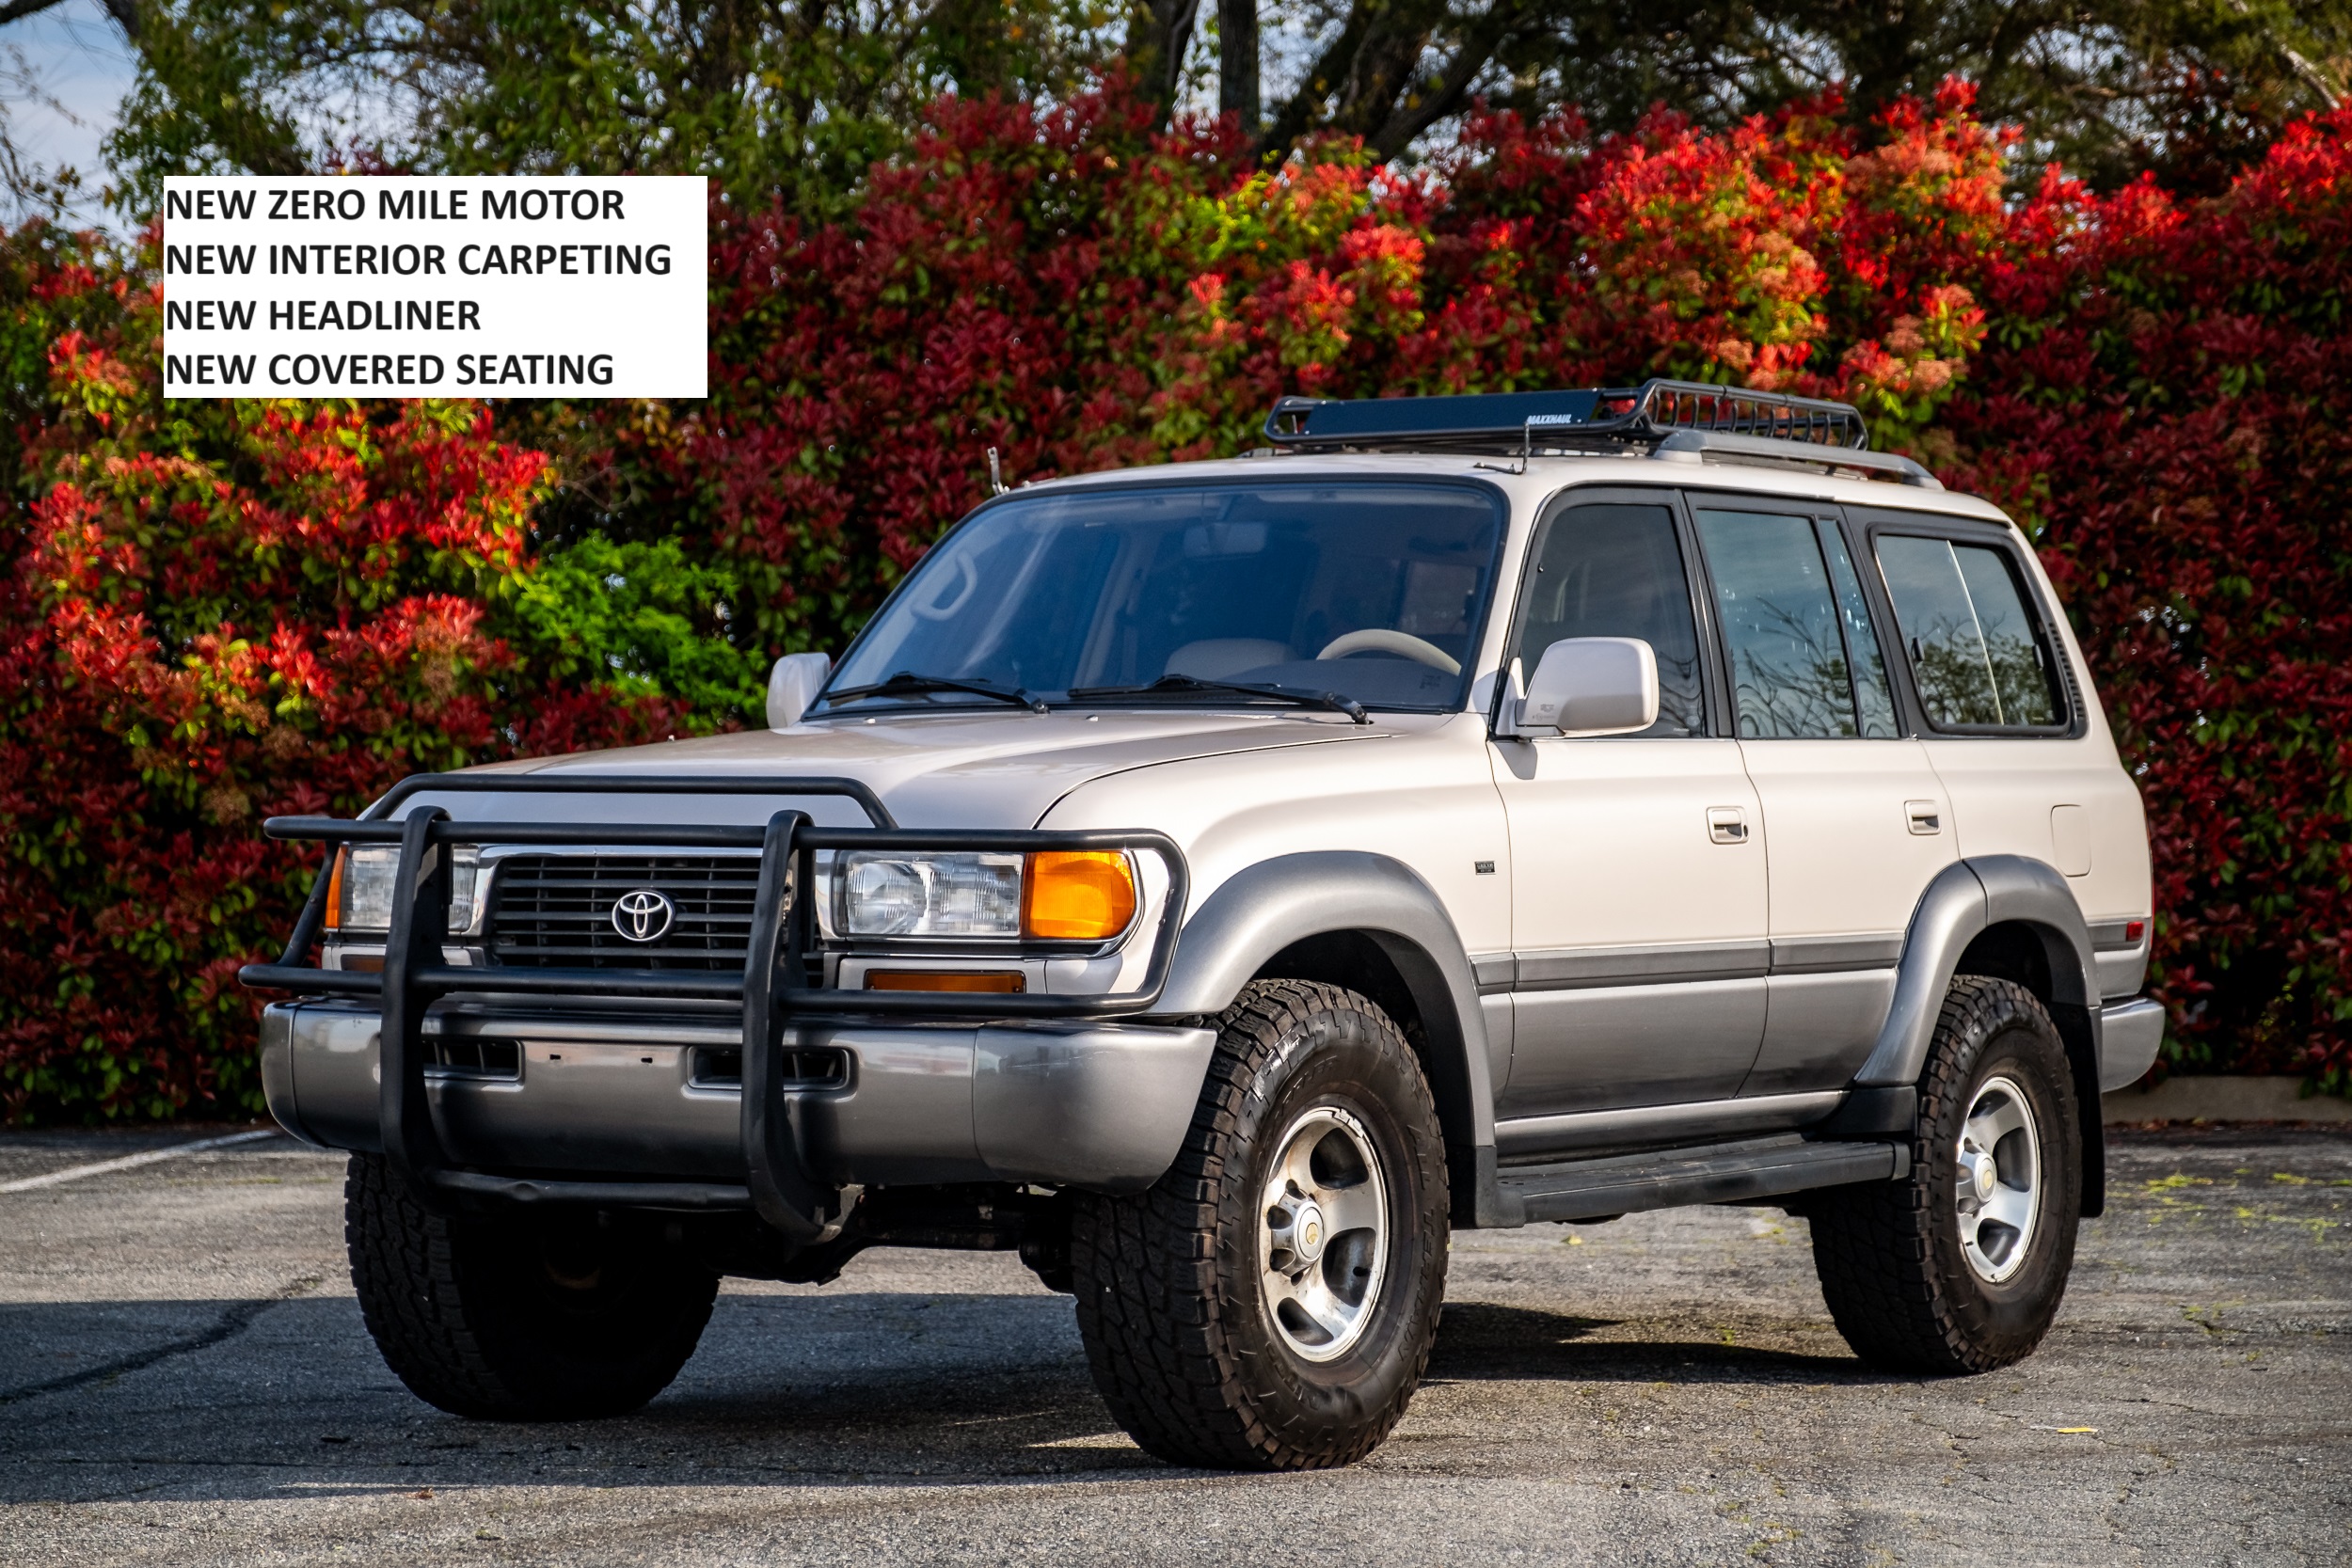 Used 1997 Toyota Land Cruiser for Sale - Autotrader